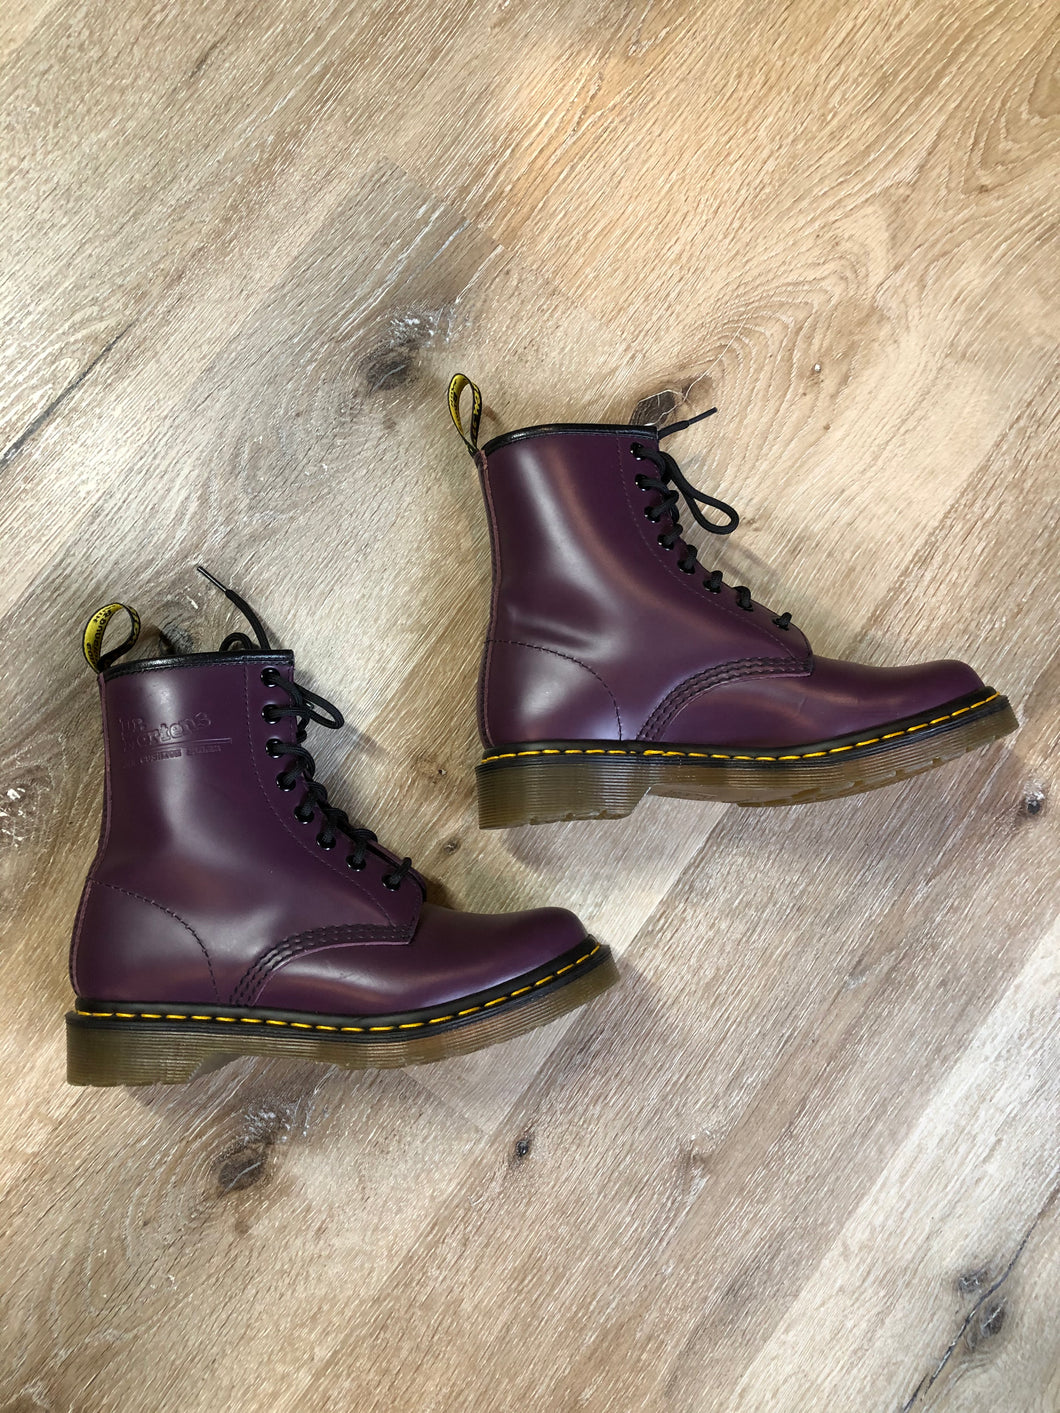 Kingspier Vintage - Doc Martens 1460 Original 8 eyelet boot in purple with smoother leather upper and iconic airwair sole.


Size 6 womens

*Boots are in excellent condition, NWOT.